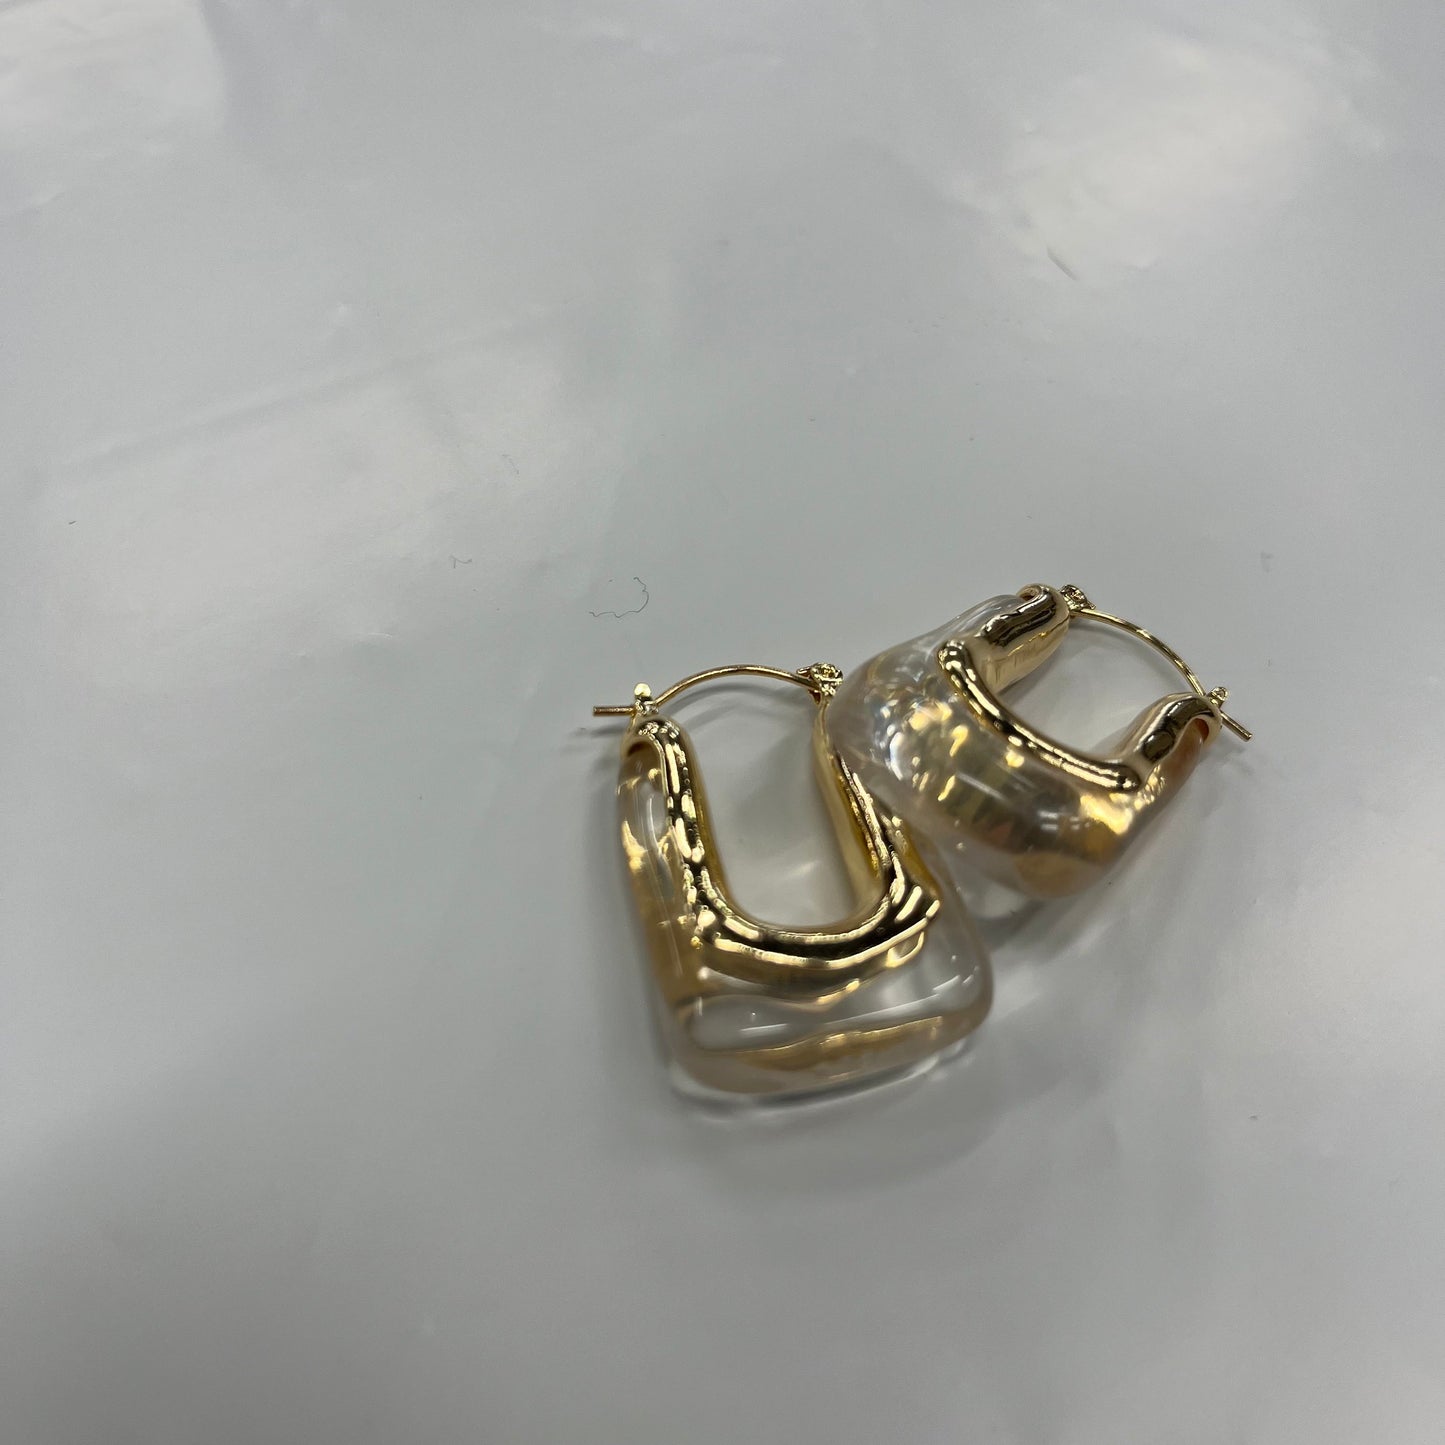 Earrings Hoop By Cmc 18K Gold Plated Over Stainless Steel